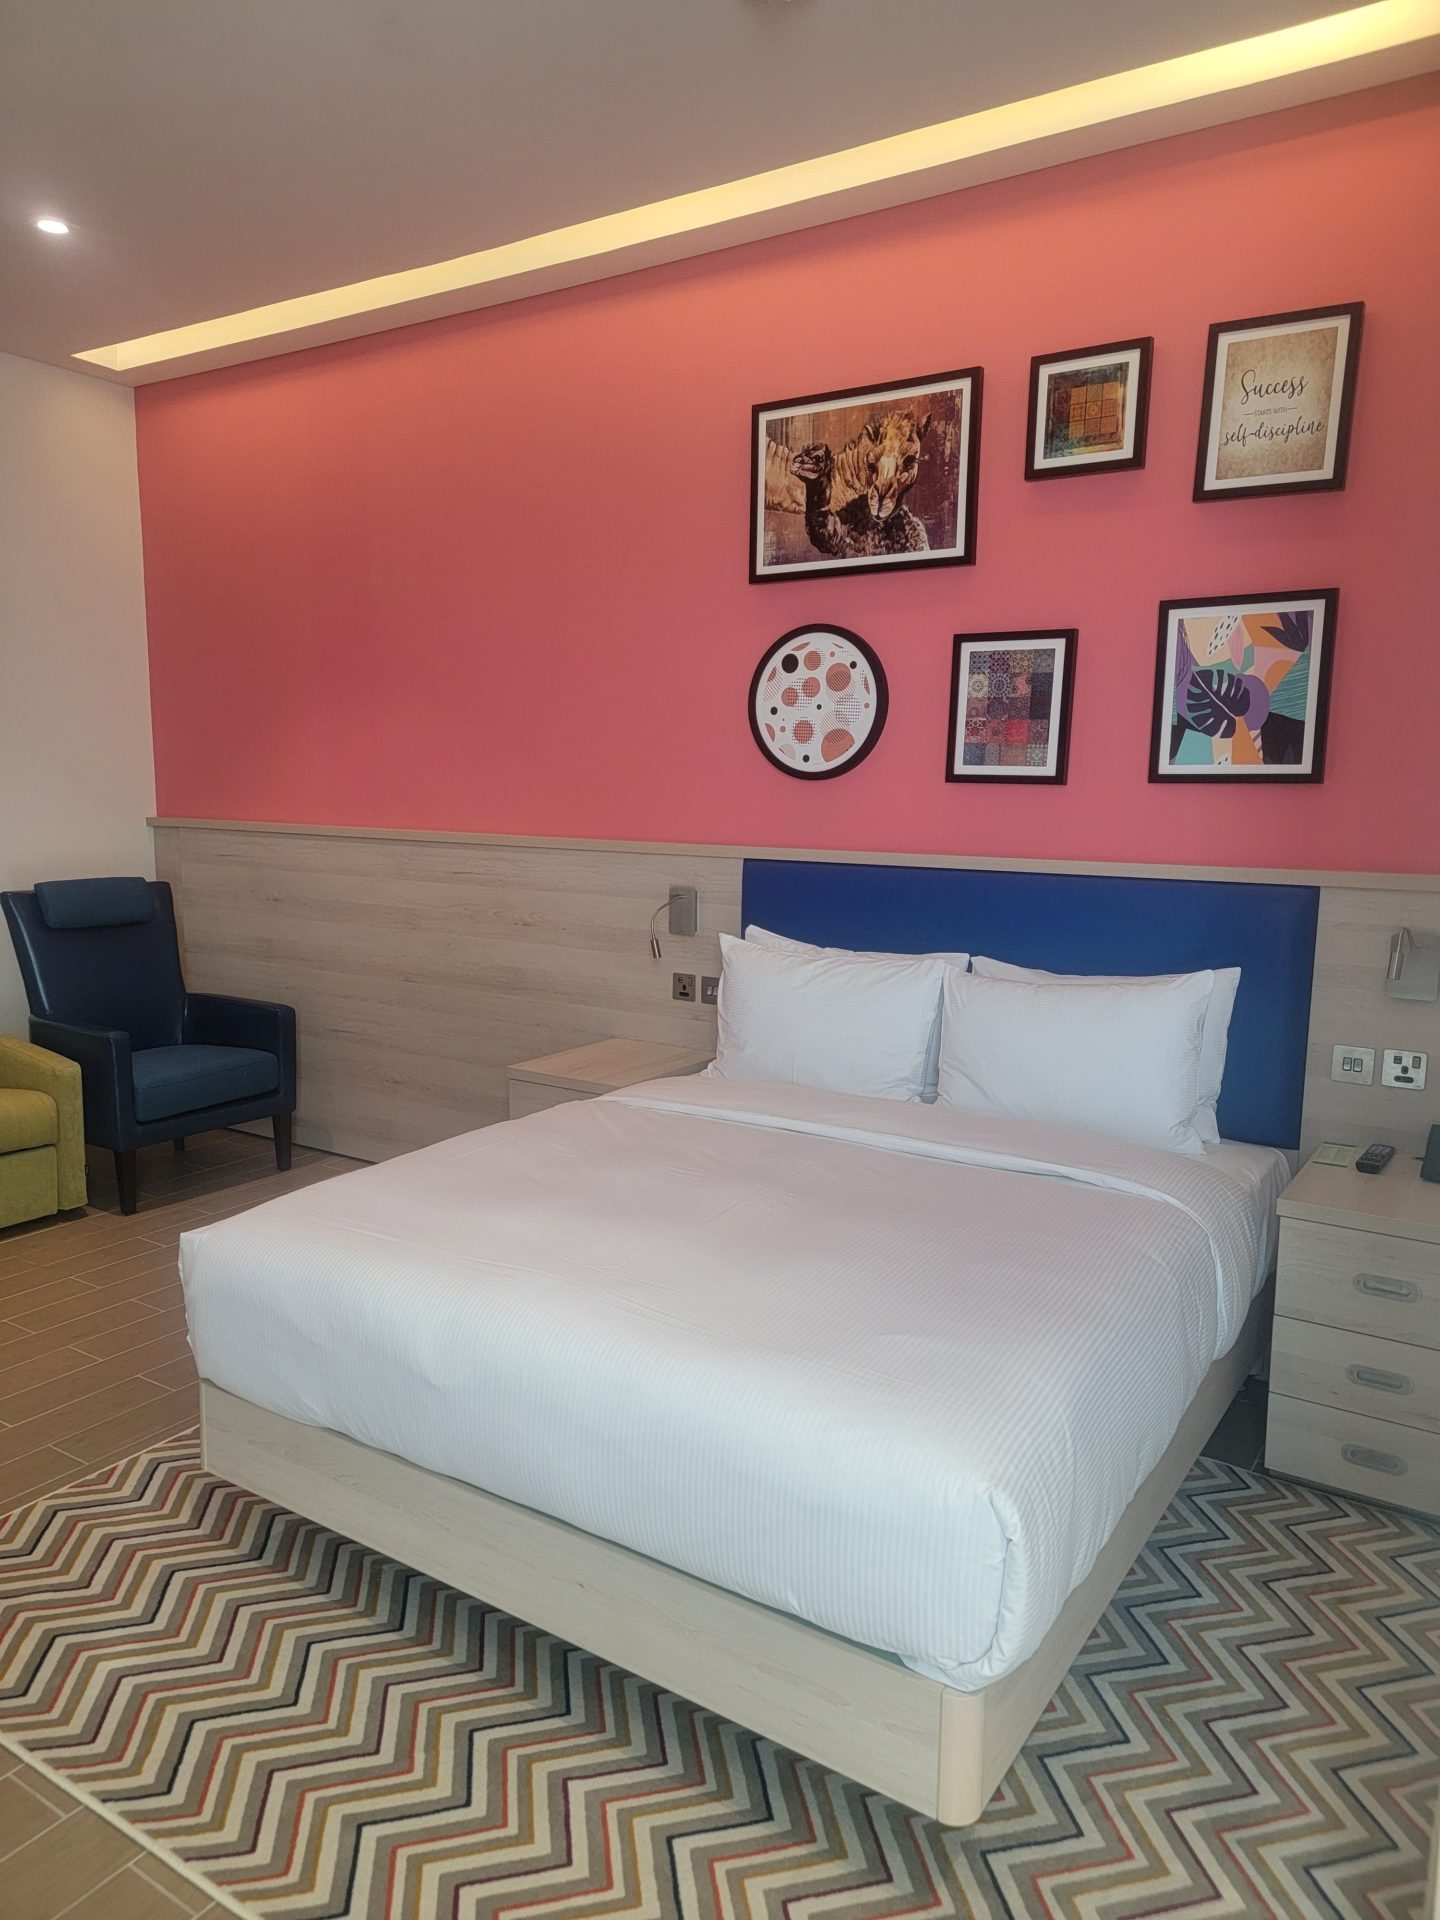 a bed in a room with pink walls and pictures on the wall